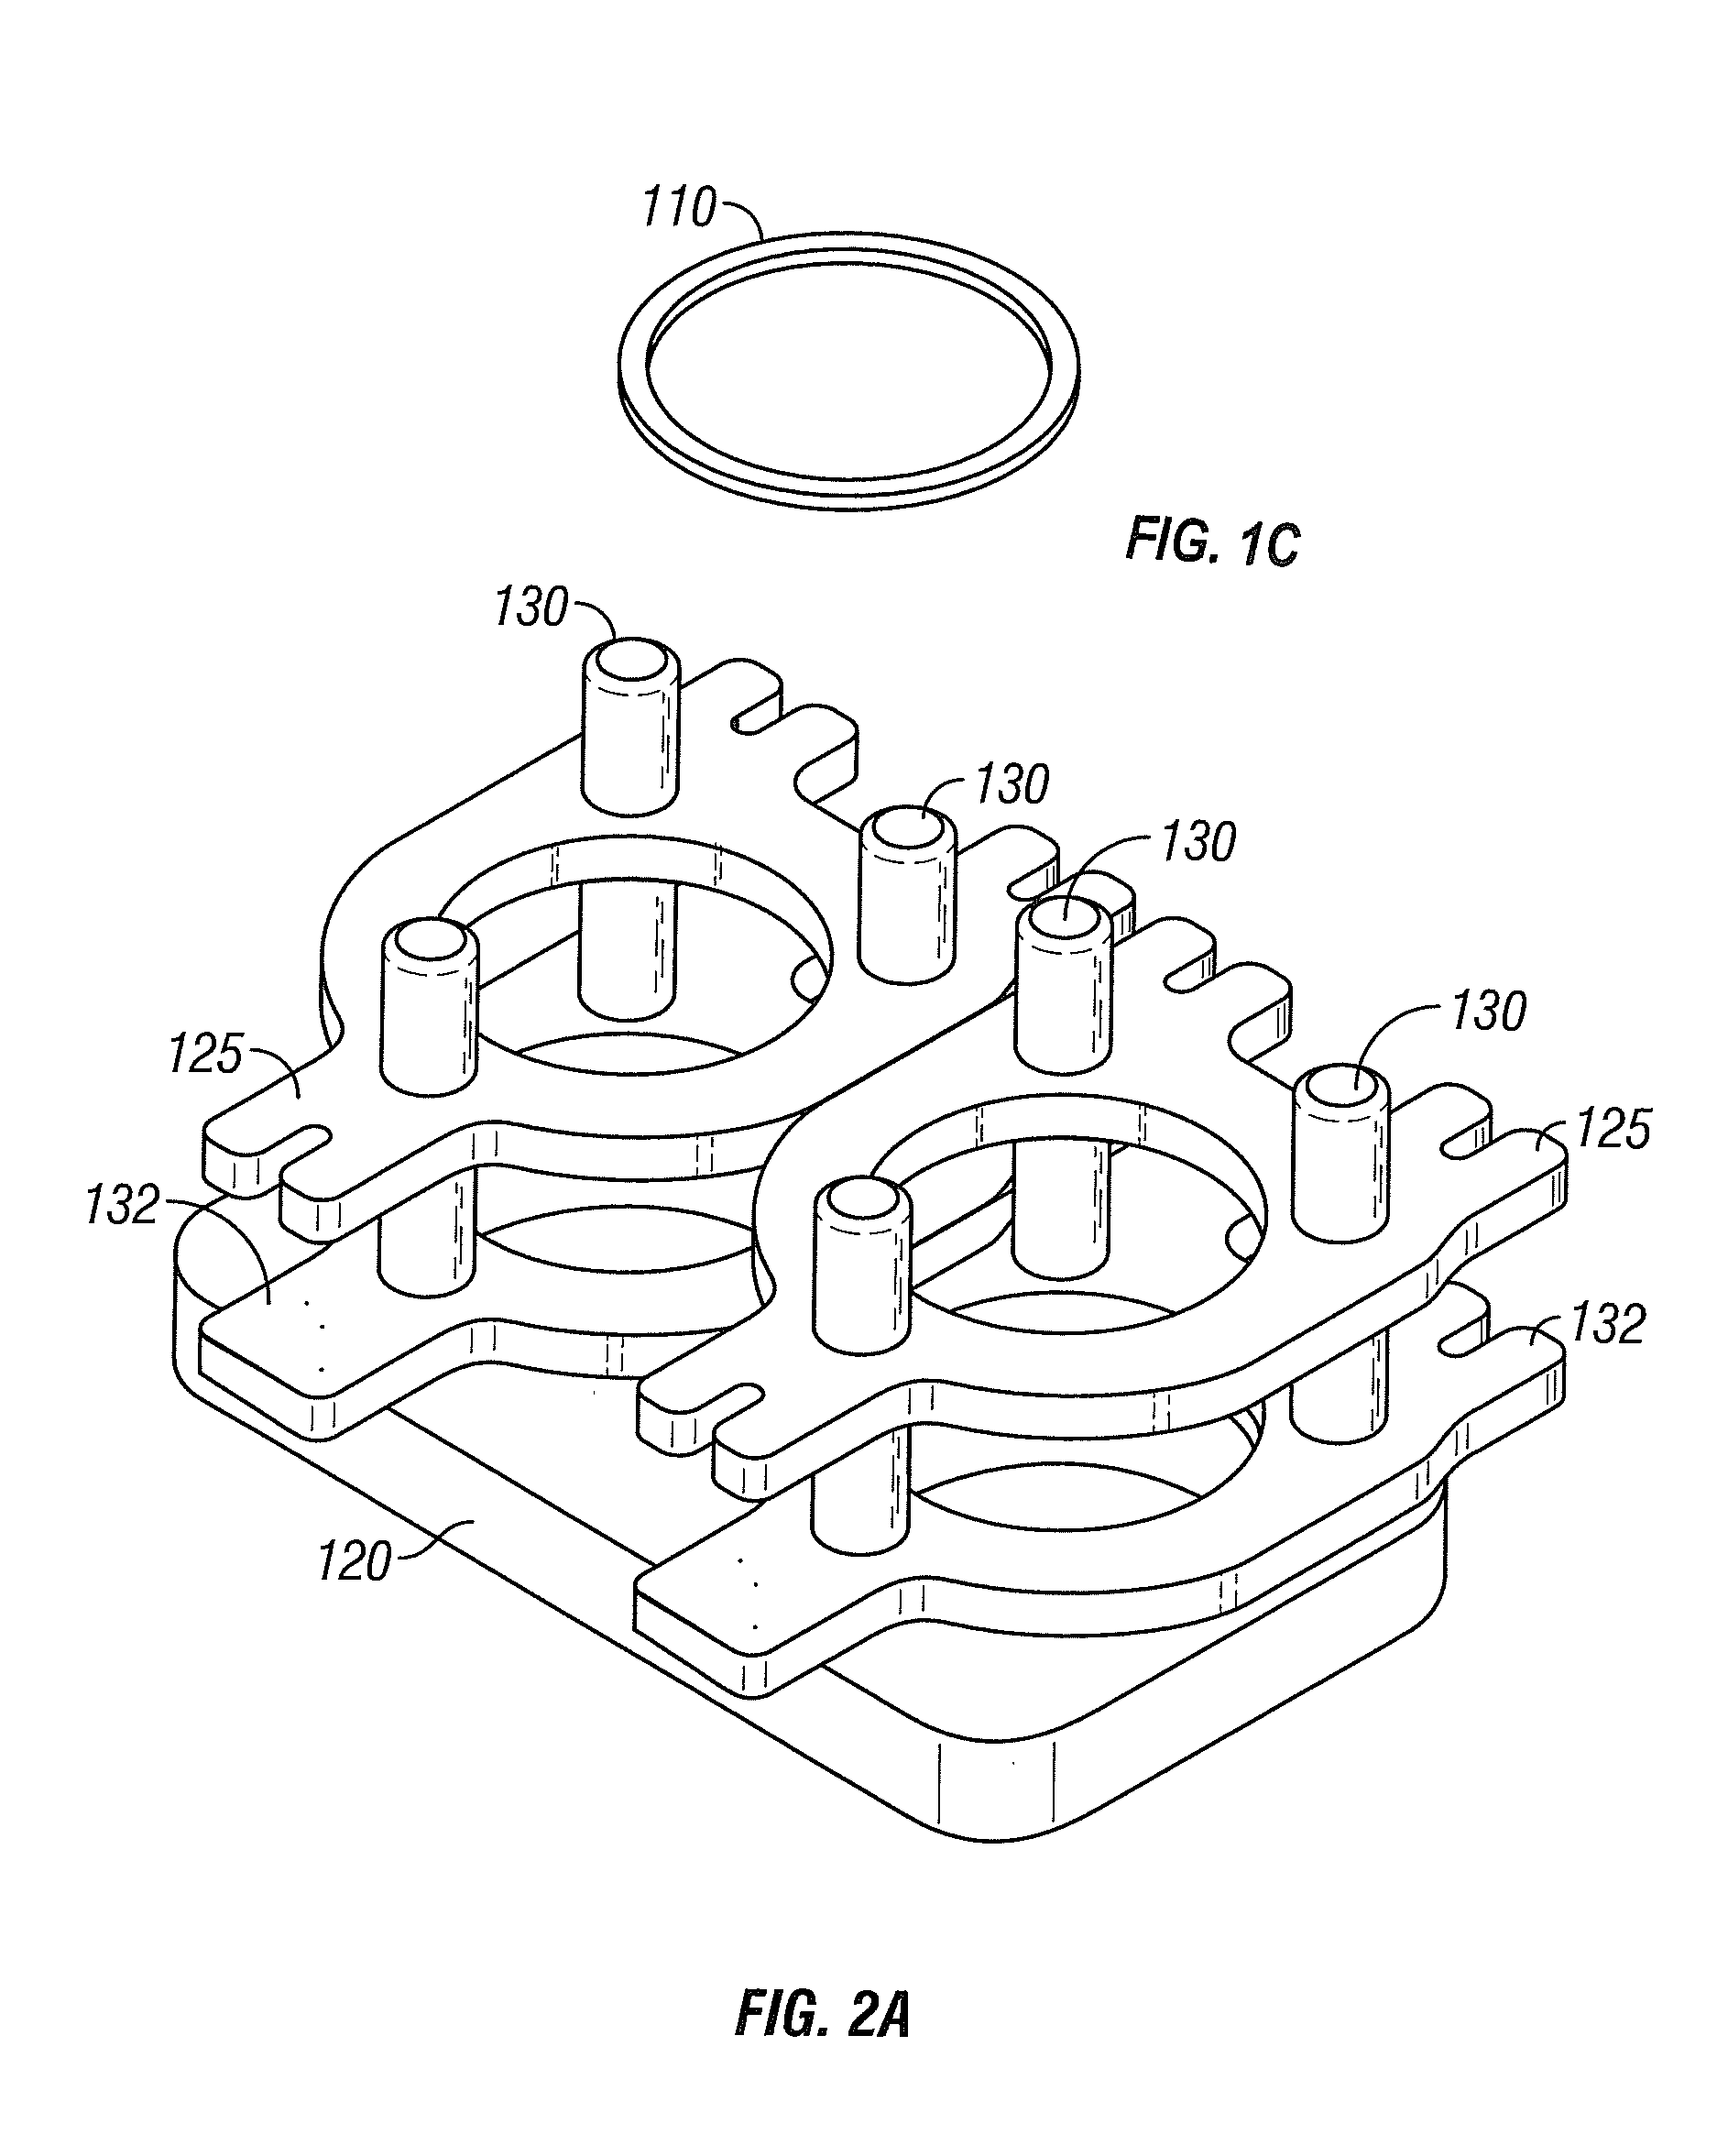 Ophthalmic eyewear with lenses cast into a frame and methods of fabrication